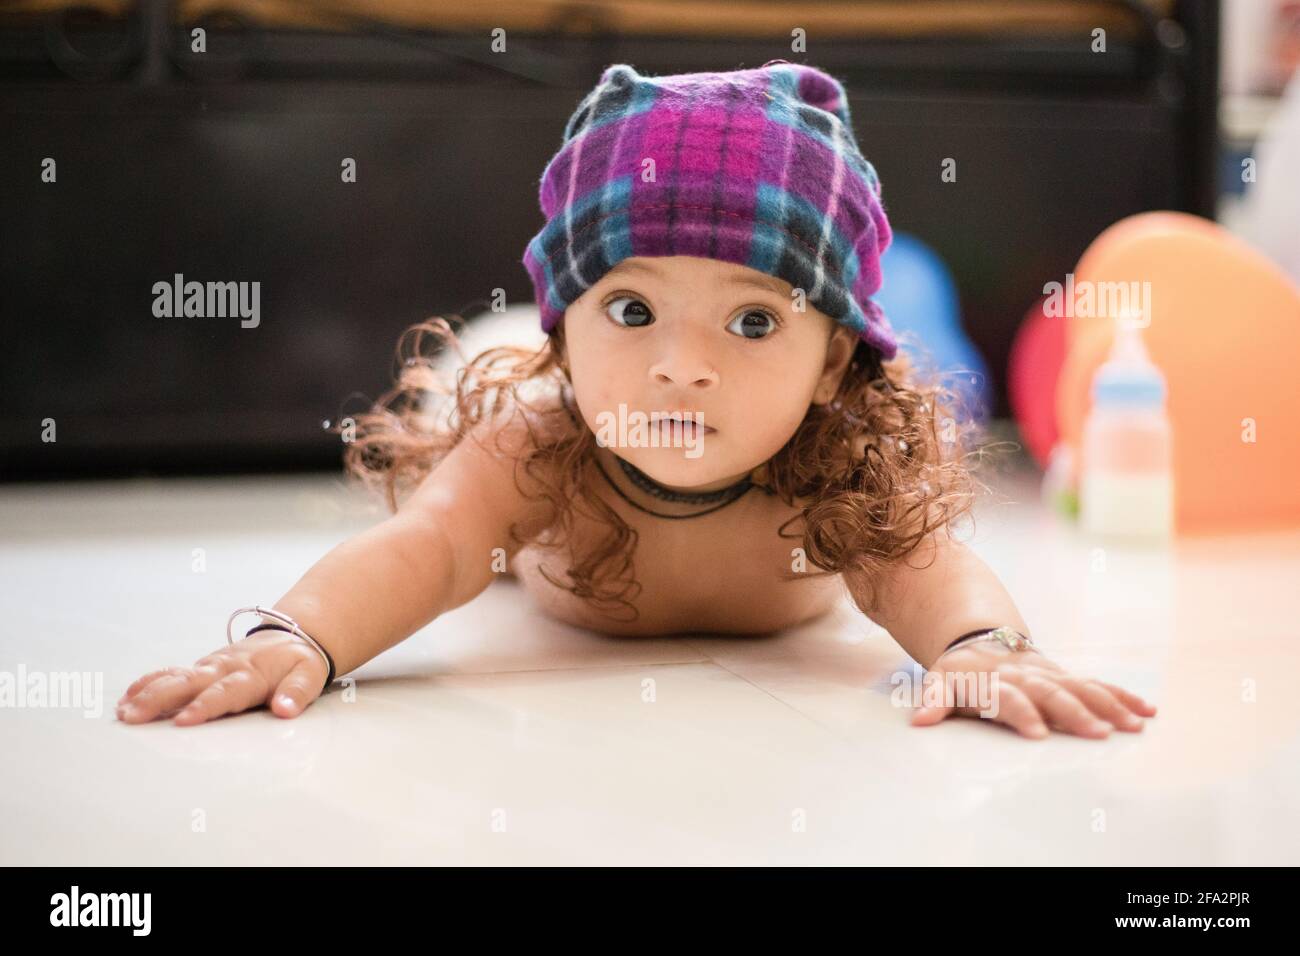 Closeup shot of a cute happy Indian female baby wearing a hat with fake hair  Stock Photo - Alamy